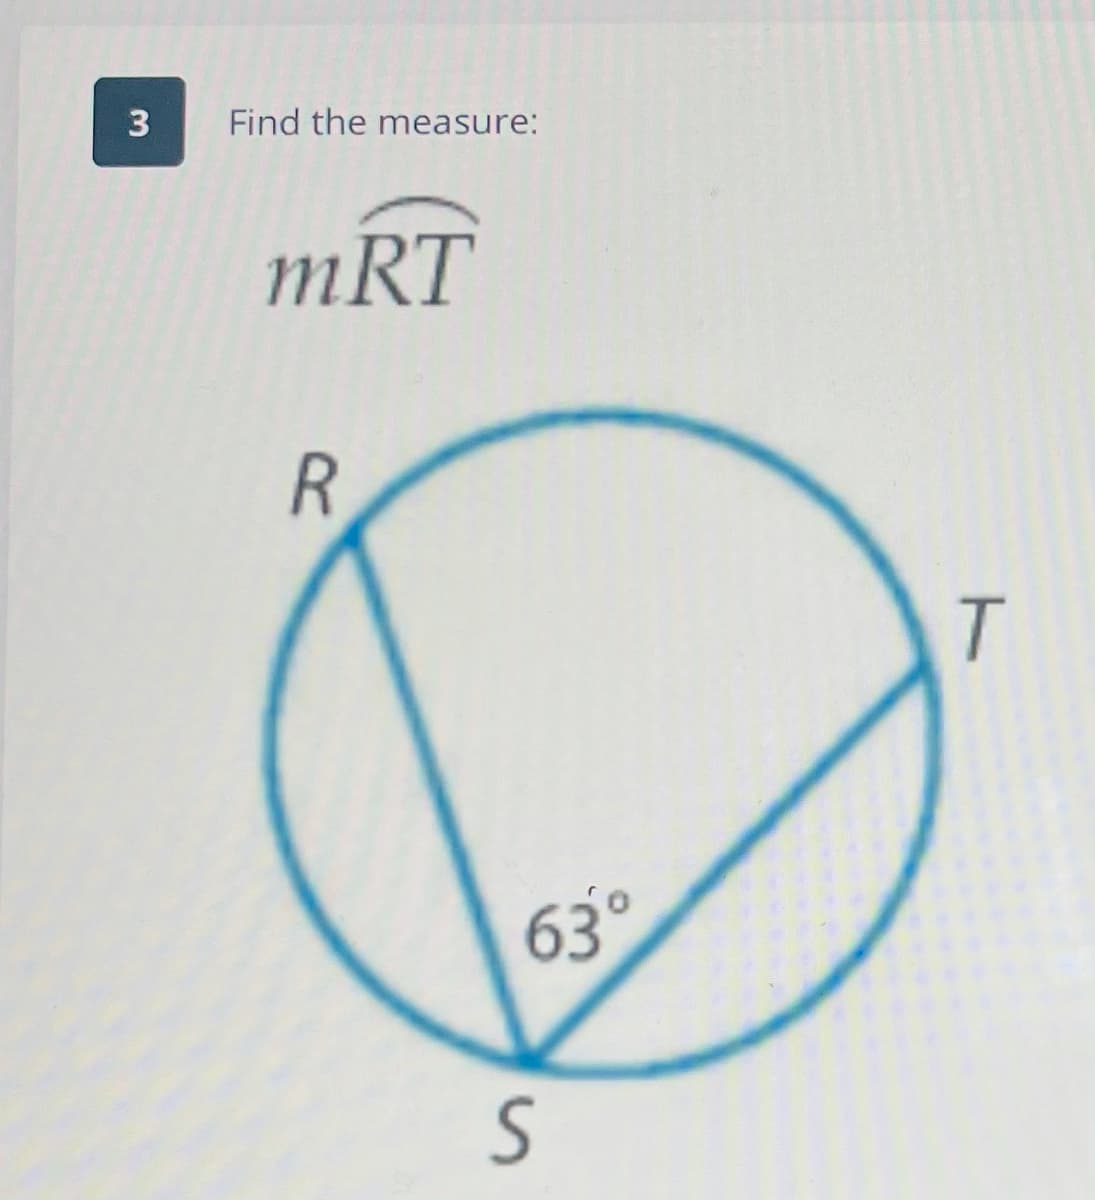 3
Find the measure:
mRT
T.
63°
